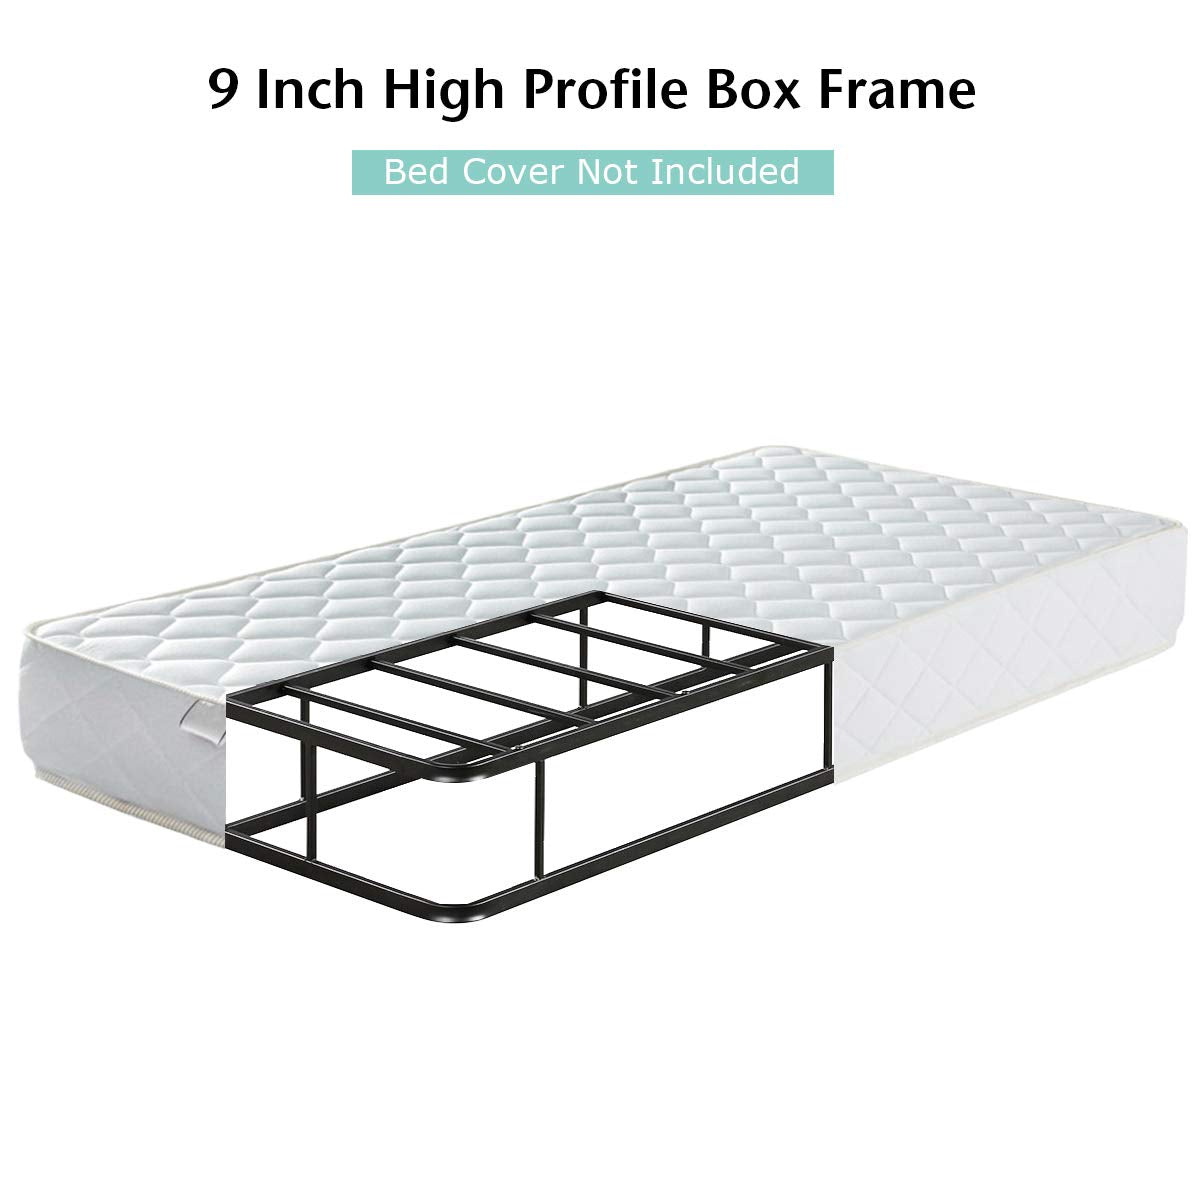 Giantex 9 inch High Profile Smart Box Spring, Mattress Foundation Easy Assembly